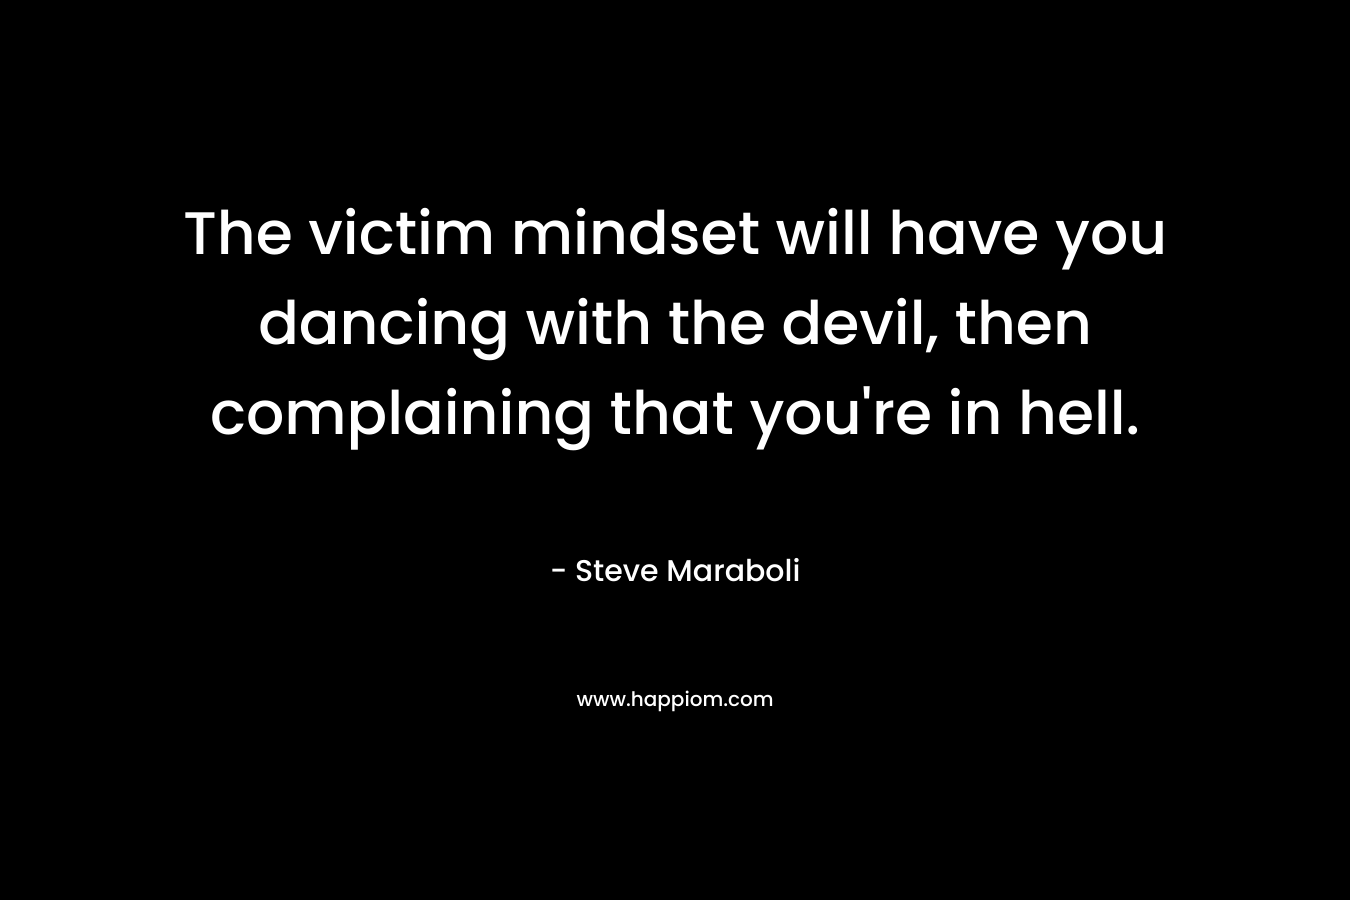 The victim mindset will have you dancing with the devil, then complaining that you’re in hell. – Steve Maraboli